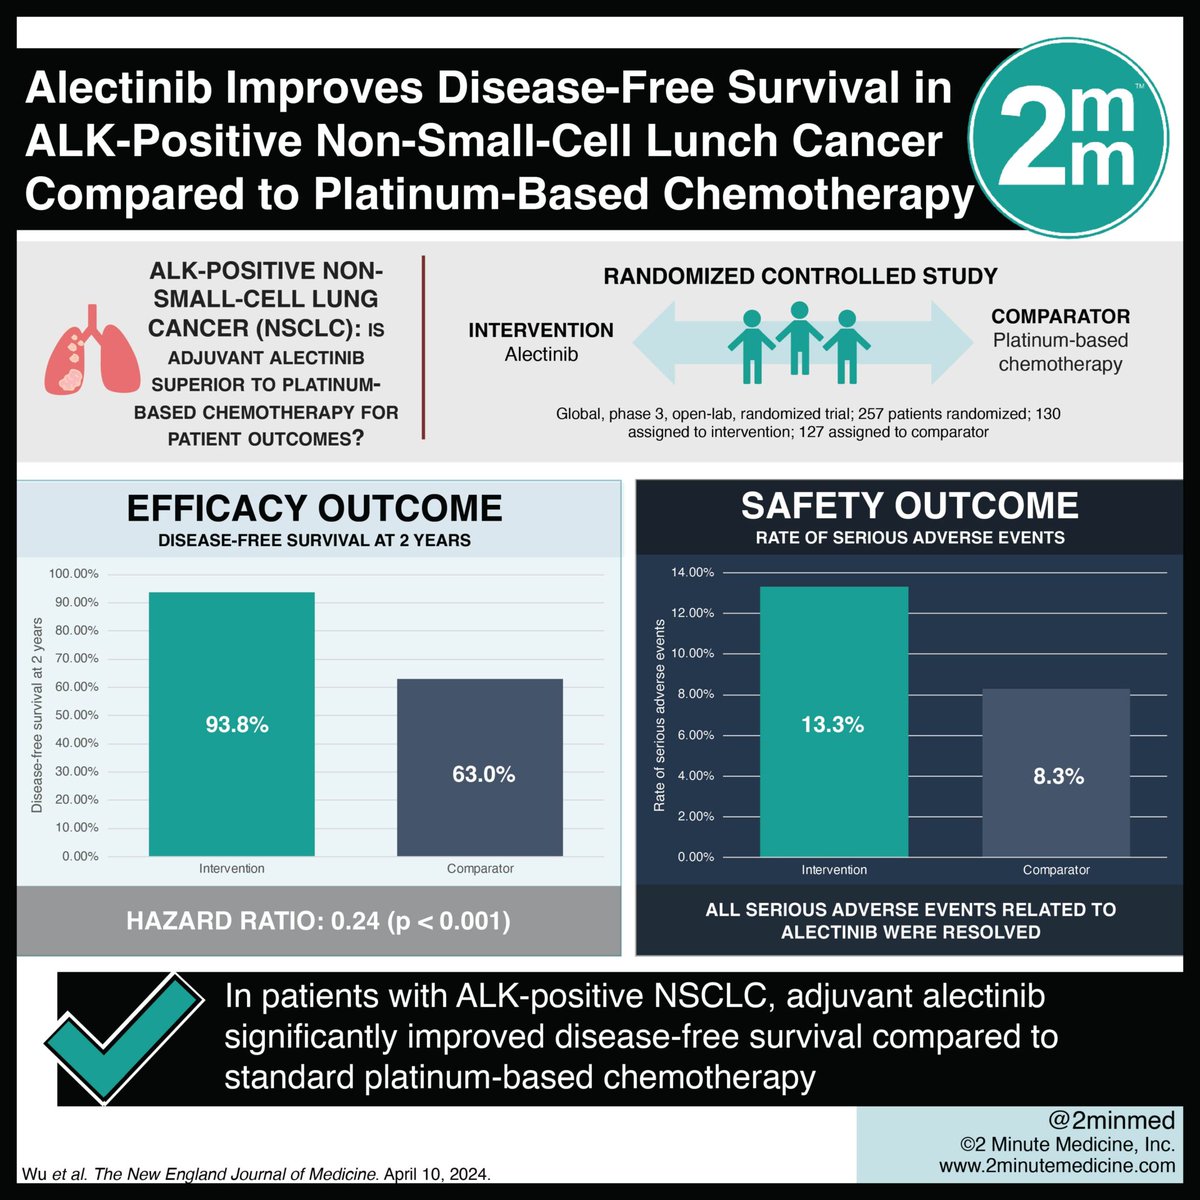 #VisualAbstract: Alectinib Improves Disease-Free Survival in ALK-Positive Non-Small-Cell Lunch Cancer Compared to Platinum-Based Chemotherapy dlvr.it/T5gqKz #StudyGraphics #alectinib